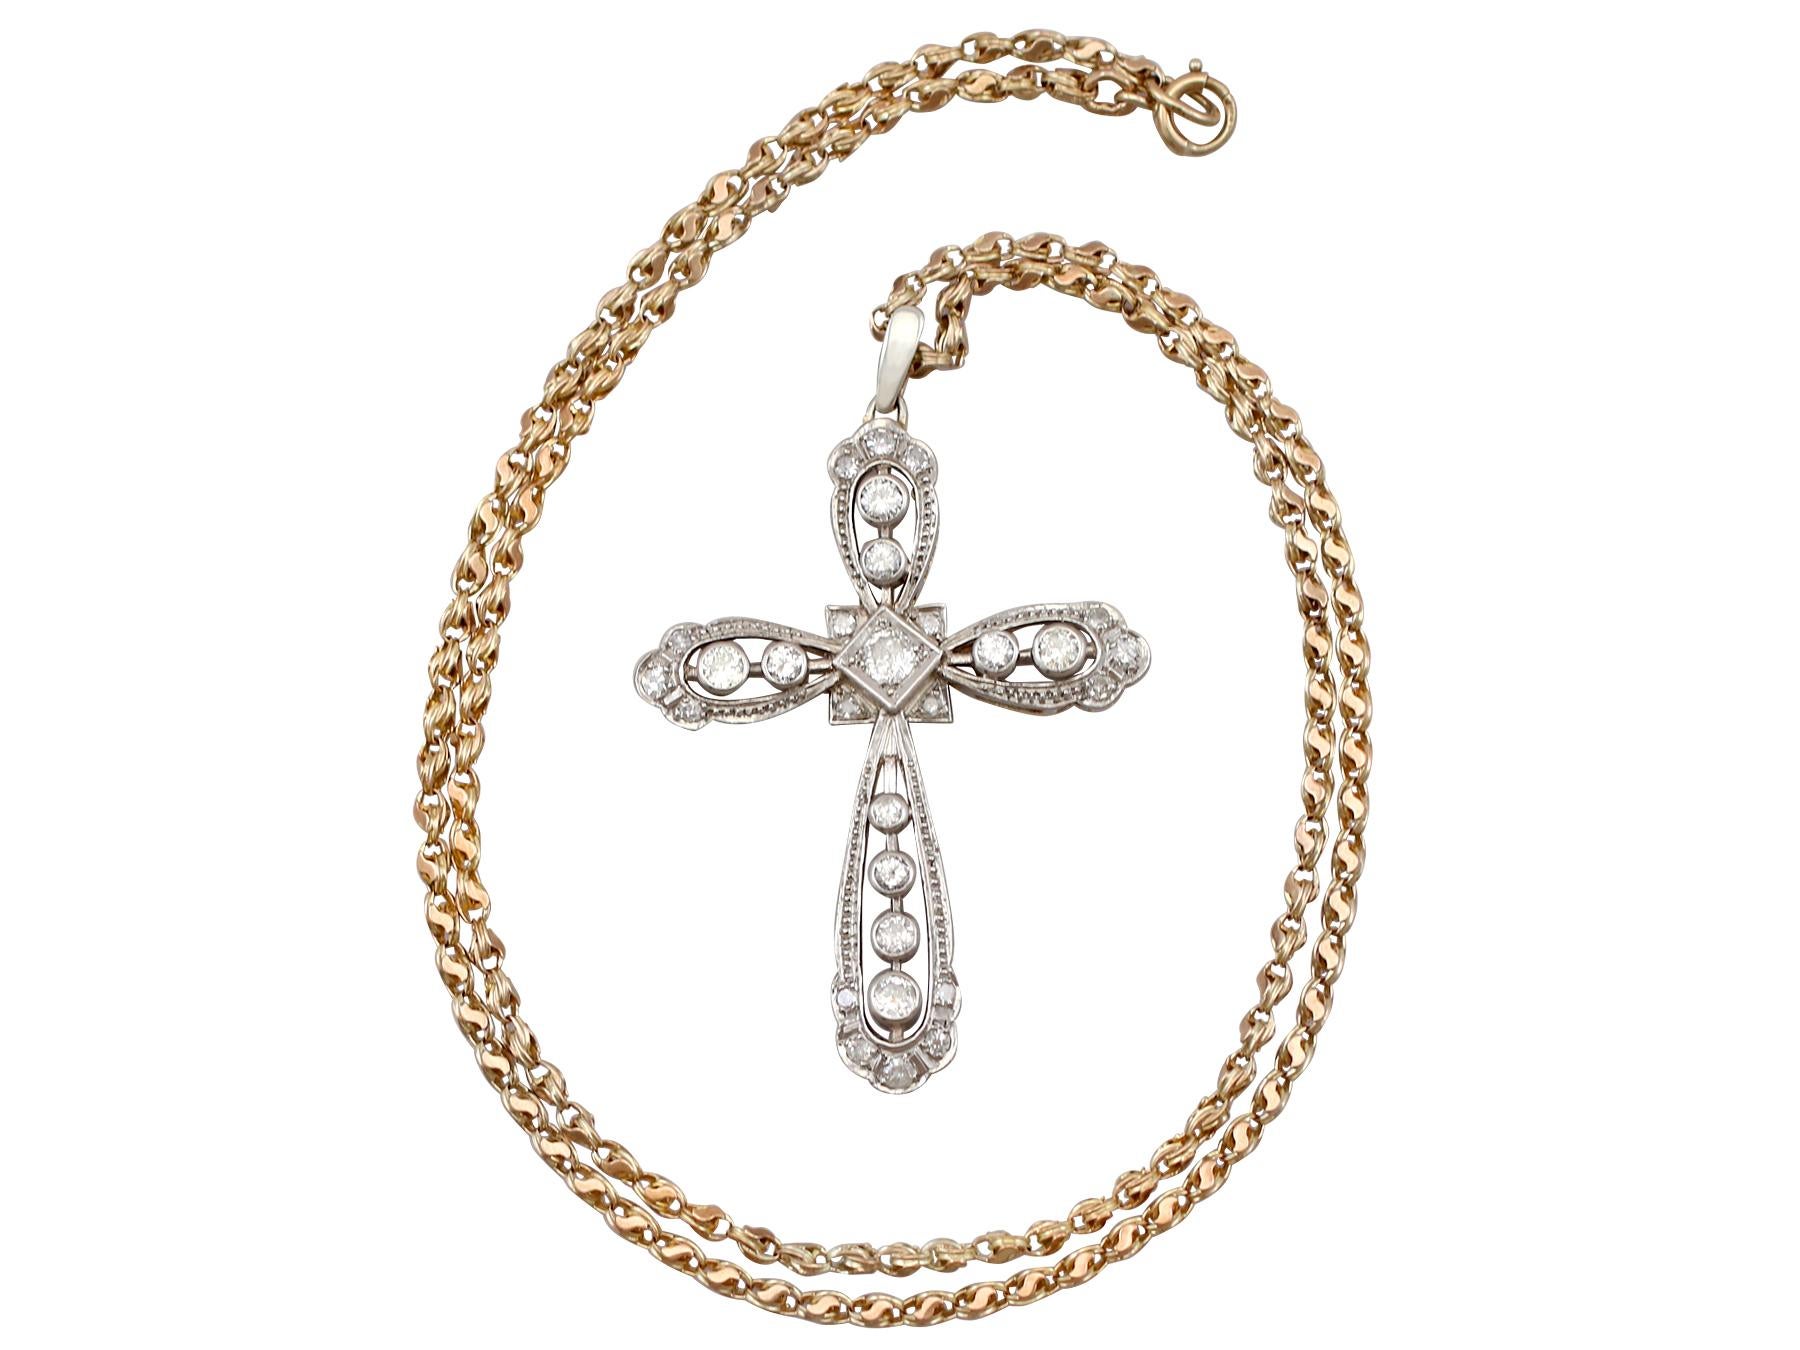 An impressive large antique 2.48 carat diamond and 18 carat yellow gold, 18 carat white gold set cross pendant; part of our diverse antique jewellery and estate jewelry collections.

This fine and impressive large antique pendant has been crafted in